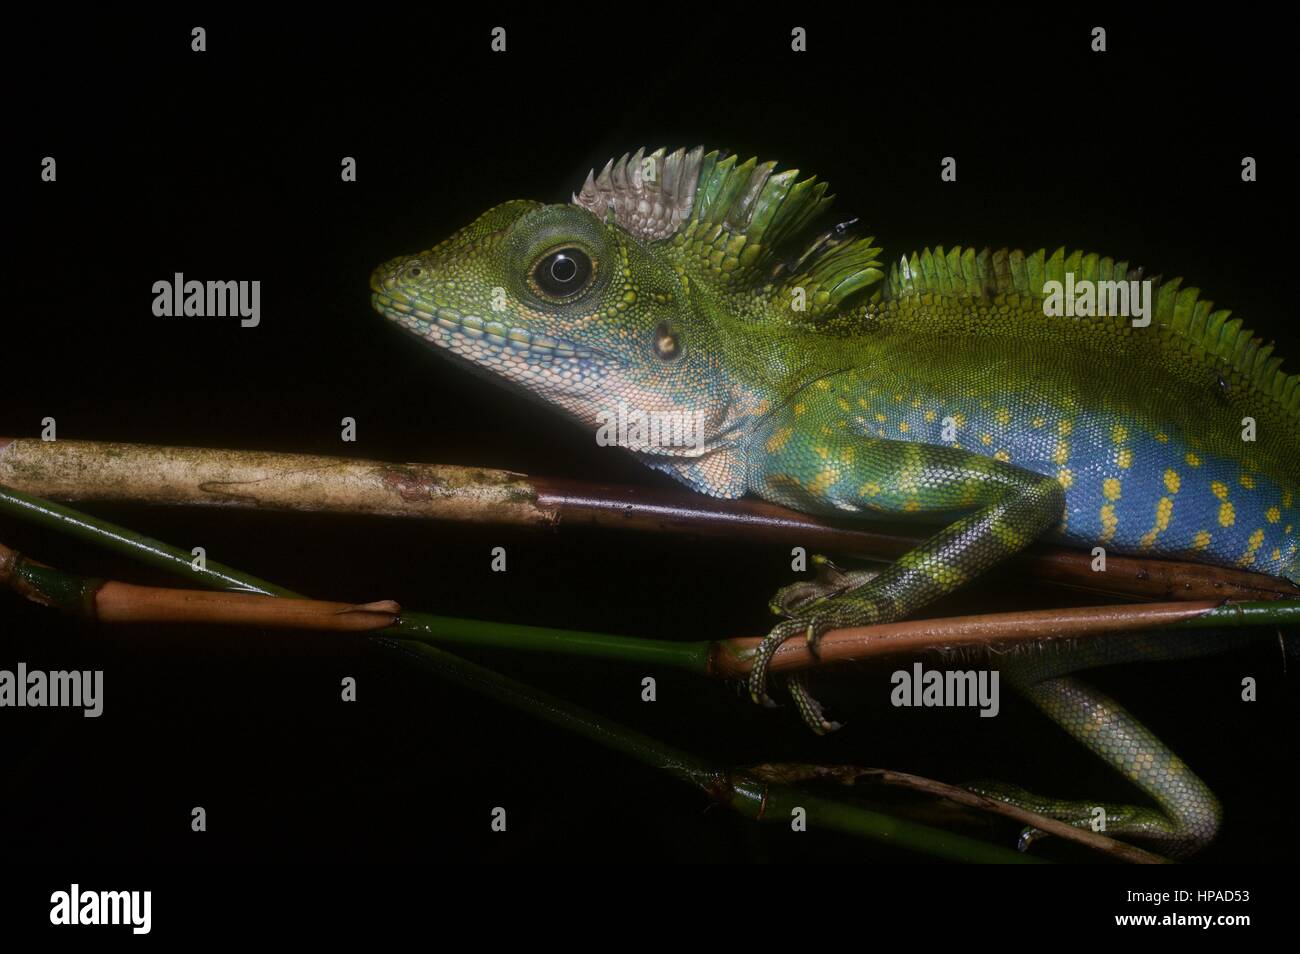 An adult male Great Anglehead Lizard (Gonocephalus grandis) resting in the Malaysian rainforest at night Stock Photo